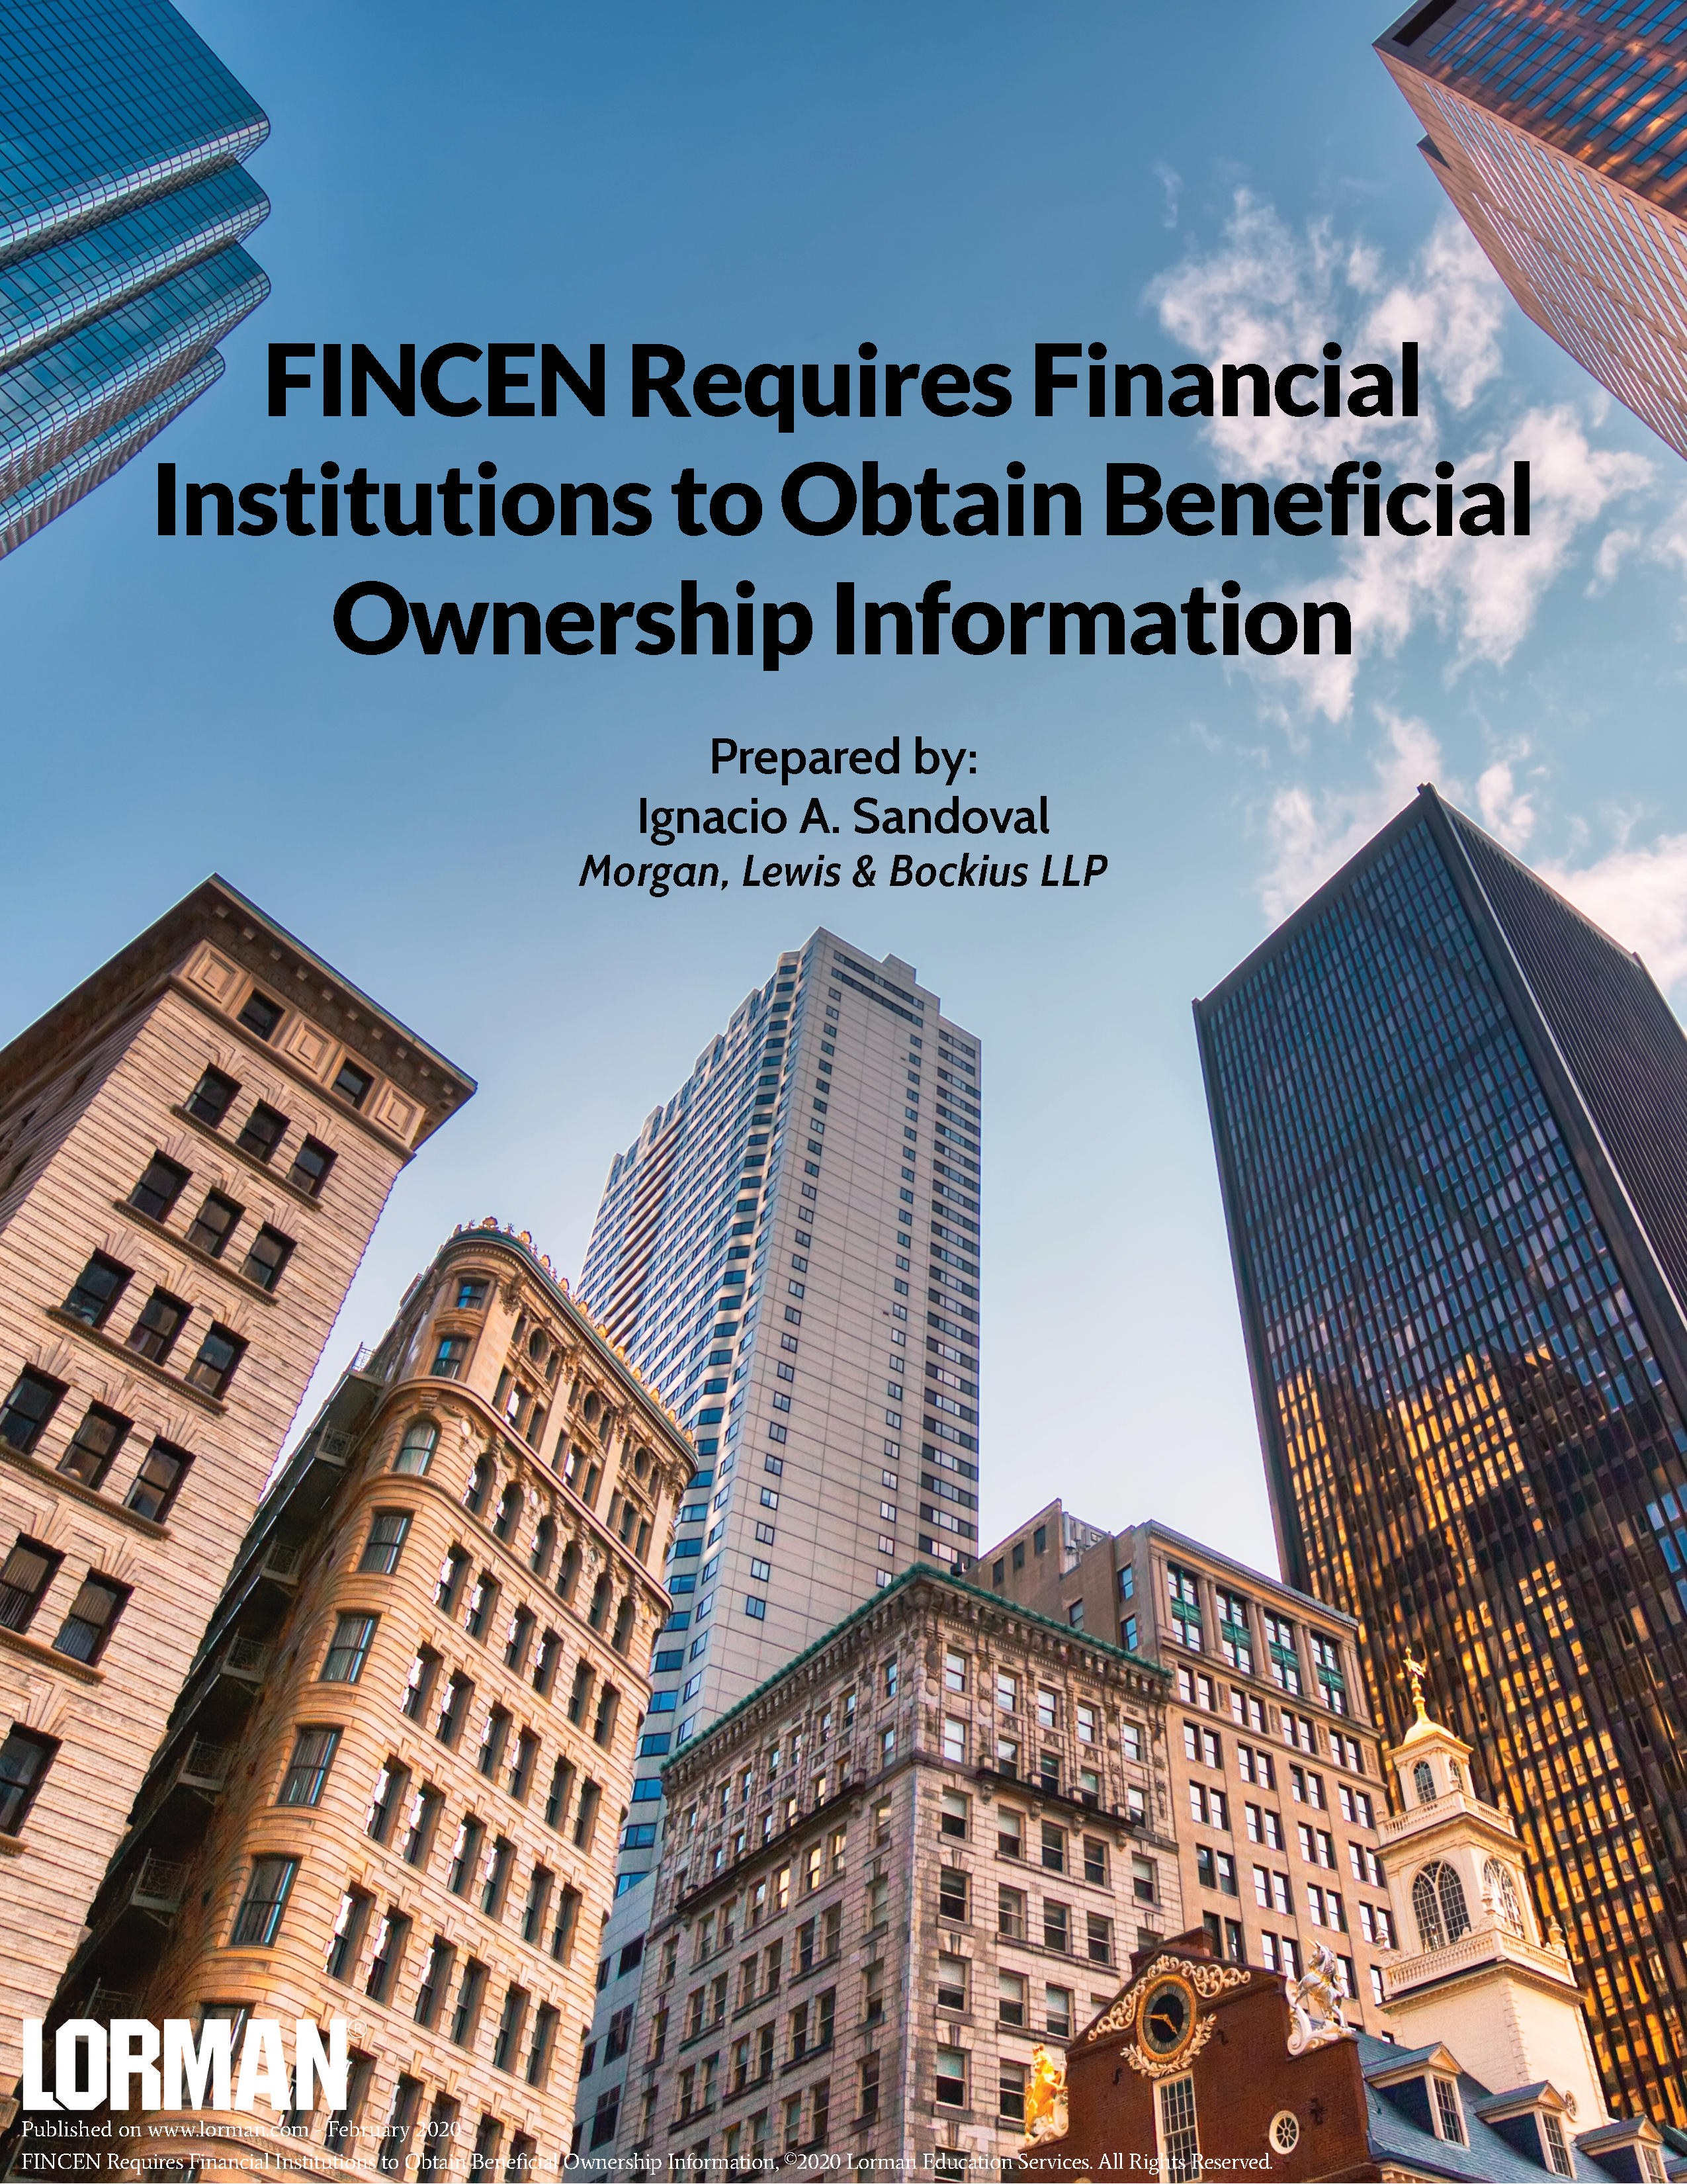 FINCEN Requires Financial Institutions to Obtain Beneficial Ownership Information